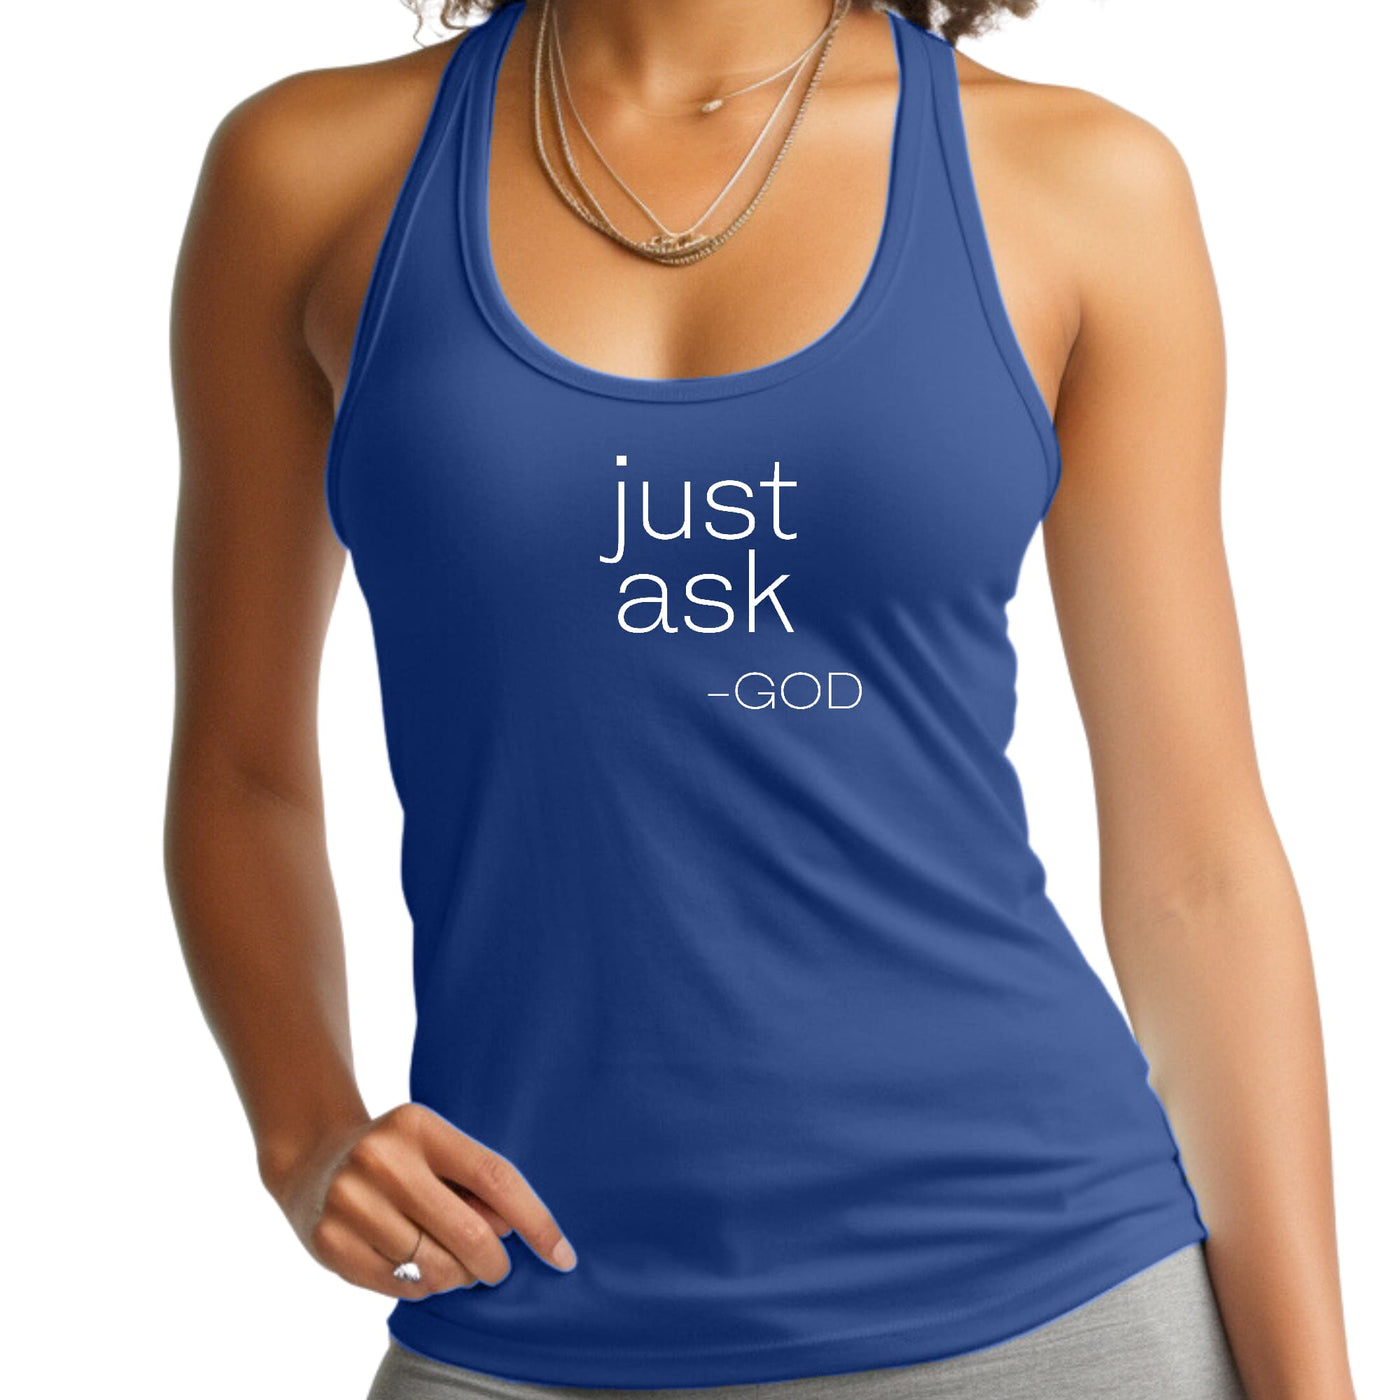 Womens Tank Top Fitness T-shirt Say It Soul ’just Ask-god’ Statement